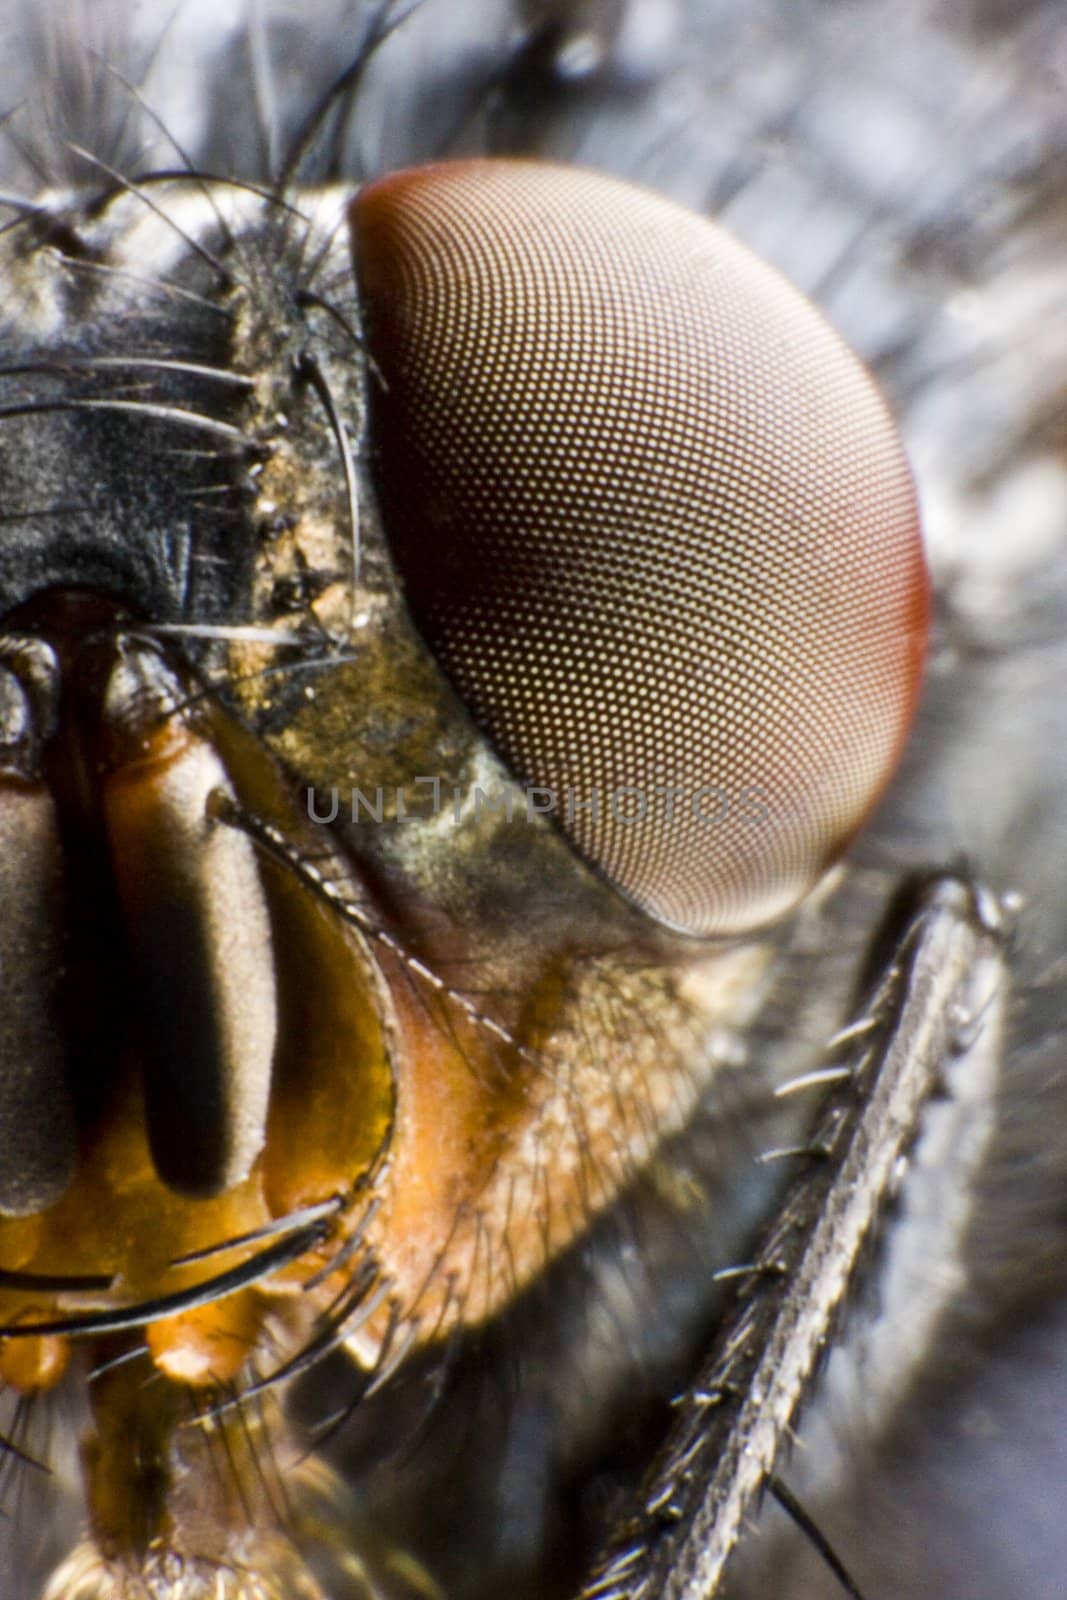 focus on compound eye. extreme macro with aggressive look